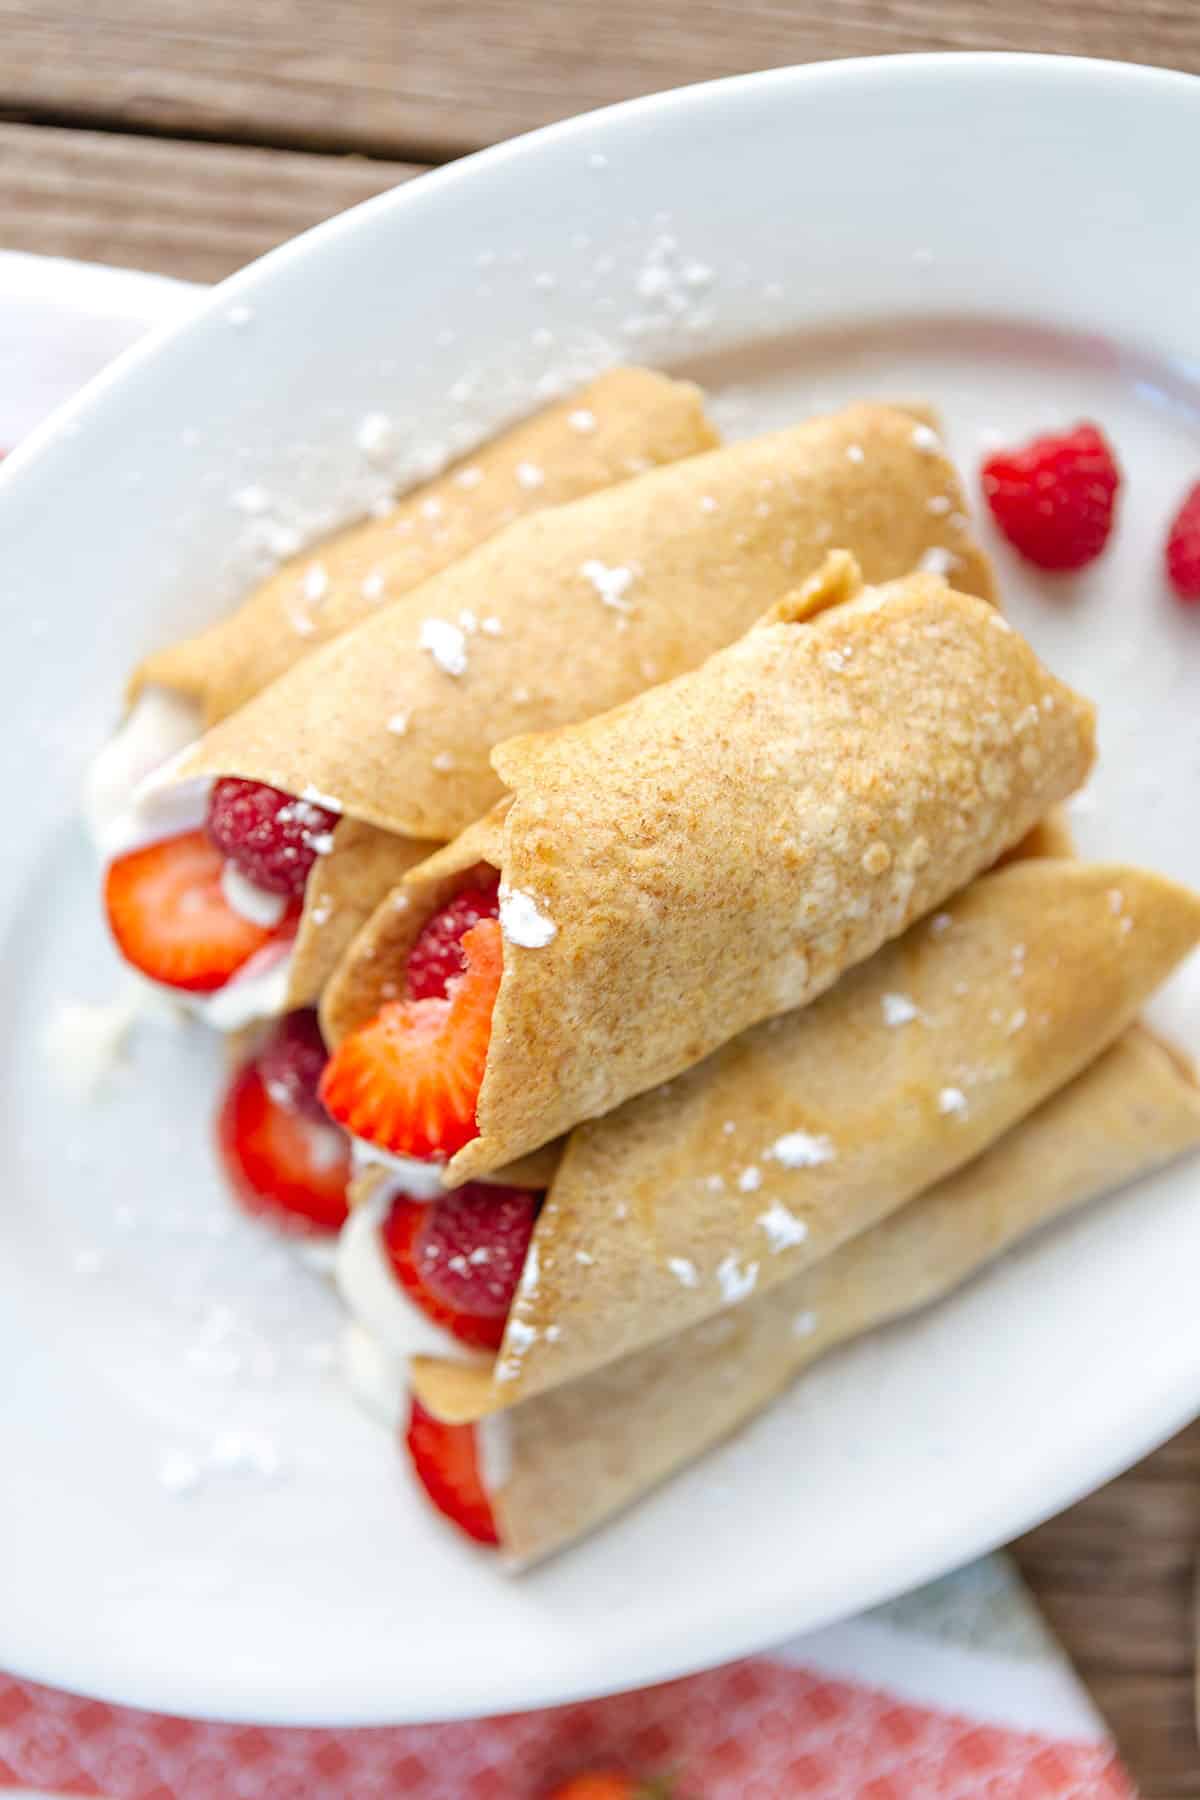 An overhead view of strawberry crepes filled with fresh strawberries and raspberries and cream filling on a white plate